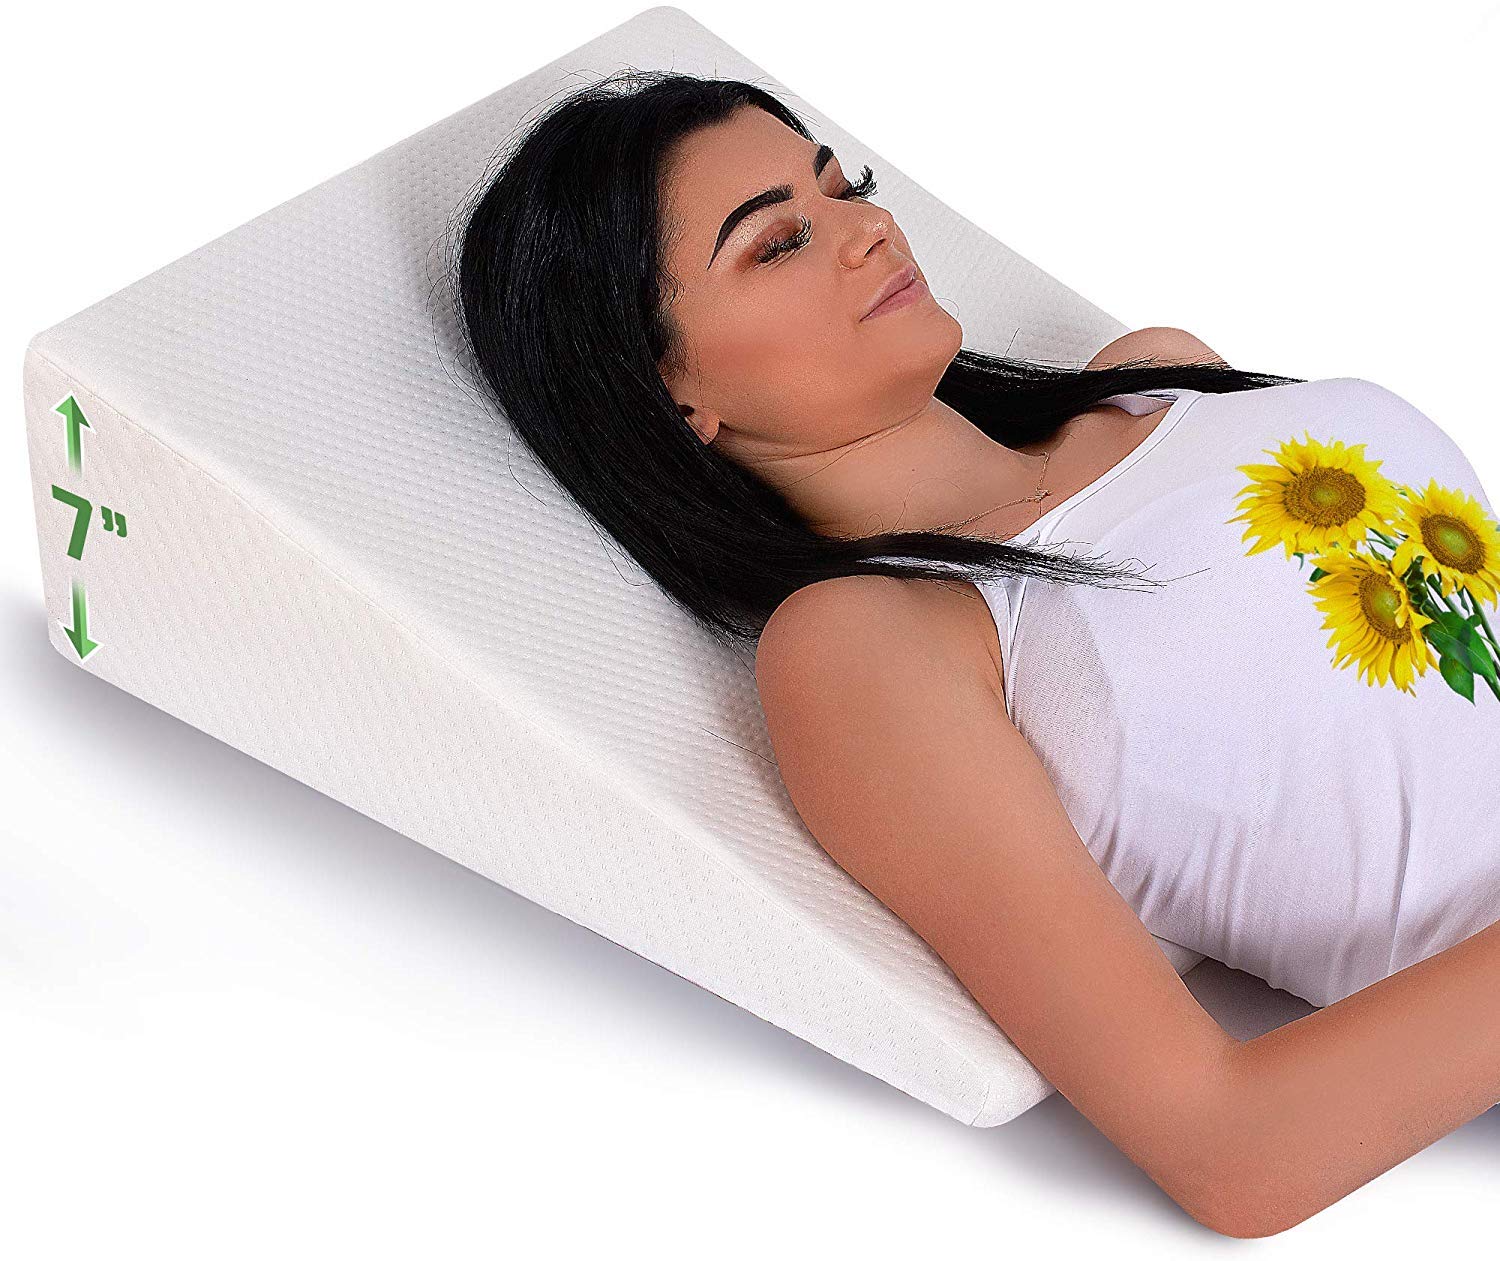 Bed Wedge Pillow with Memory Foam Top - Reduce Neck and Back Pain, Snoring, Acid Reflux and Respiratory Problems - Ideal for Sleeping, Reading, Rest or Elevation - Breathable and Washable Cover - 12in  - Acceptable